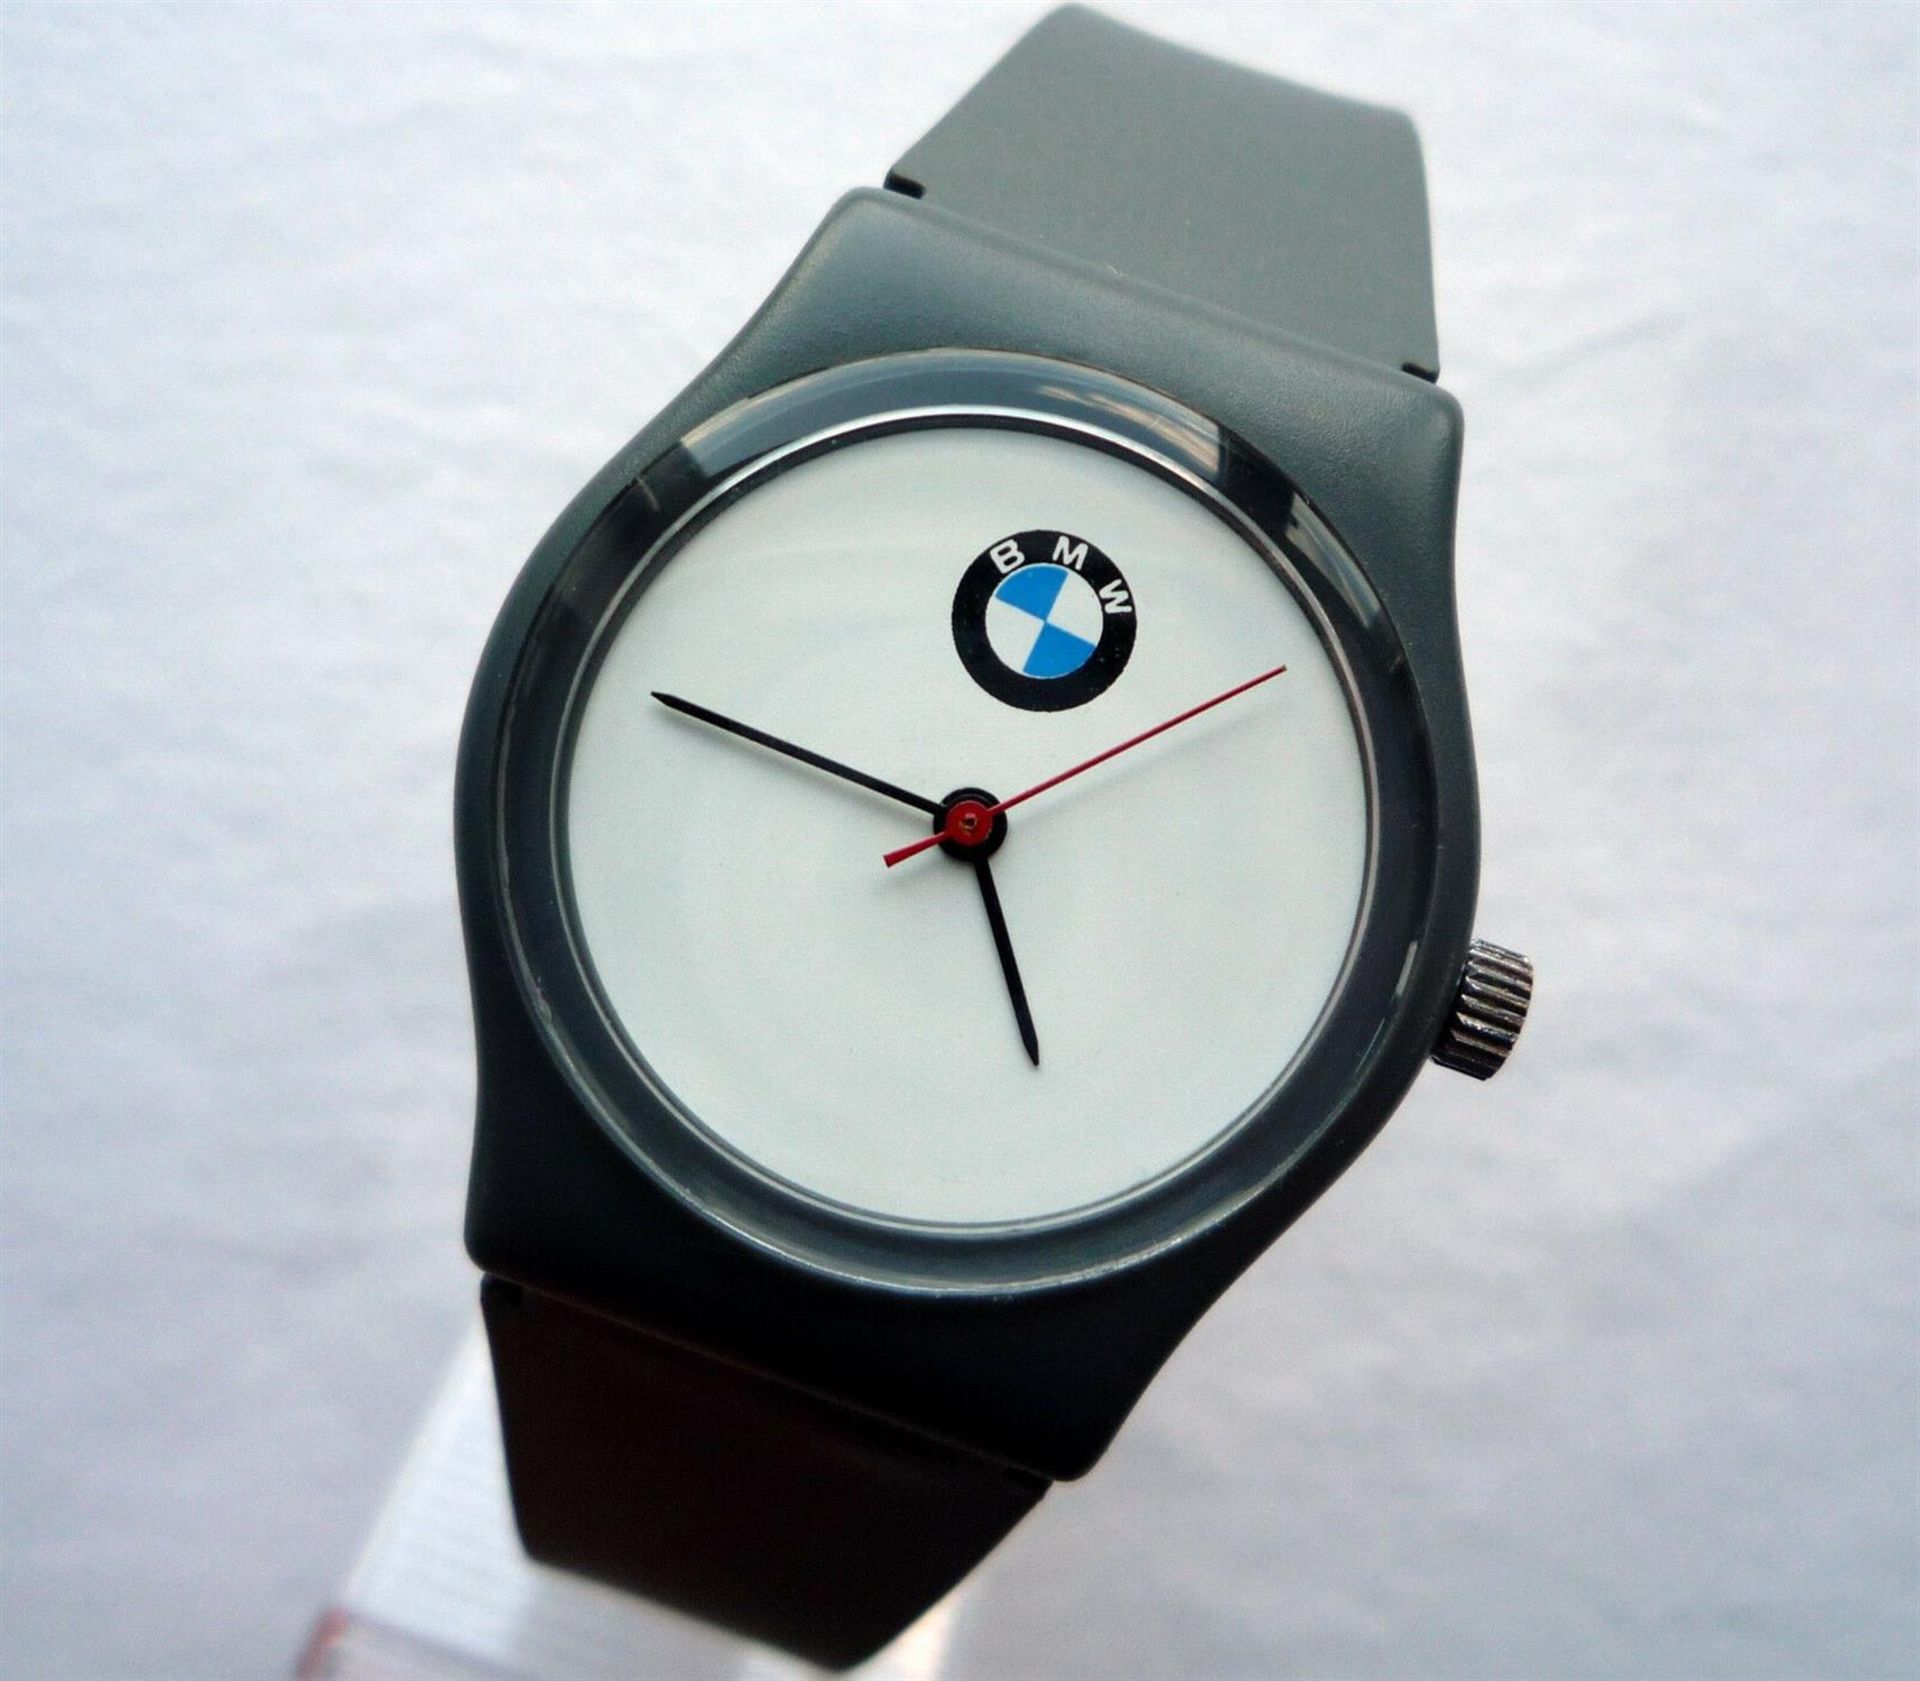 BMW retro-design Silicone Band Watch - Image 3 of 5